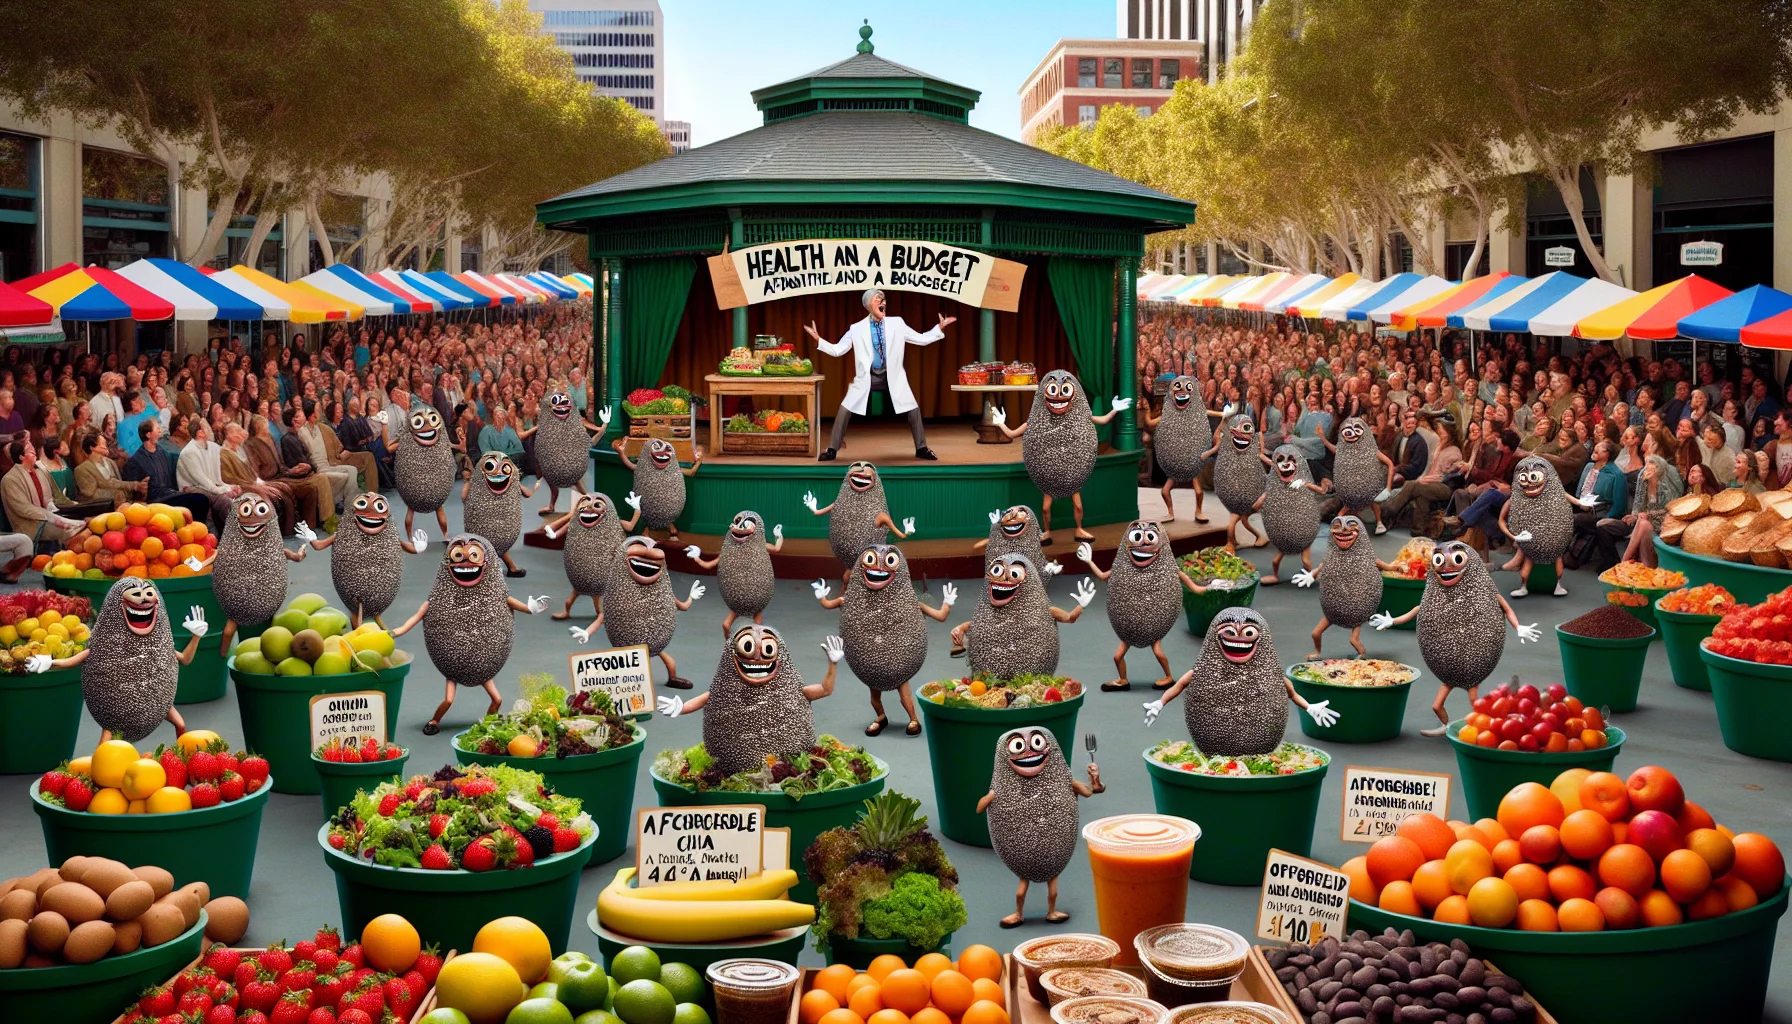 Picture a hilarious scene of a lively farmers' market. The vibrant and fresh fruits and vegetables, all adorned enticingly with affordable price tags. In the center, a gazebo with a sign reading 'Health on a Budget.' Under it, humorously anthropomorphic chia seeds are putting on a captivating musical, brandishing tiny signs saying 'Affordable and Nutritious!' They're dancing amongst a plethora of salads, smoothies, and baked goods, all abundantly sprinkled with chia seeds, their rich taste palpable even in the image. The audience is an amused mix of men, women, and children of various descents, all entranced by the chia extravaganza.